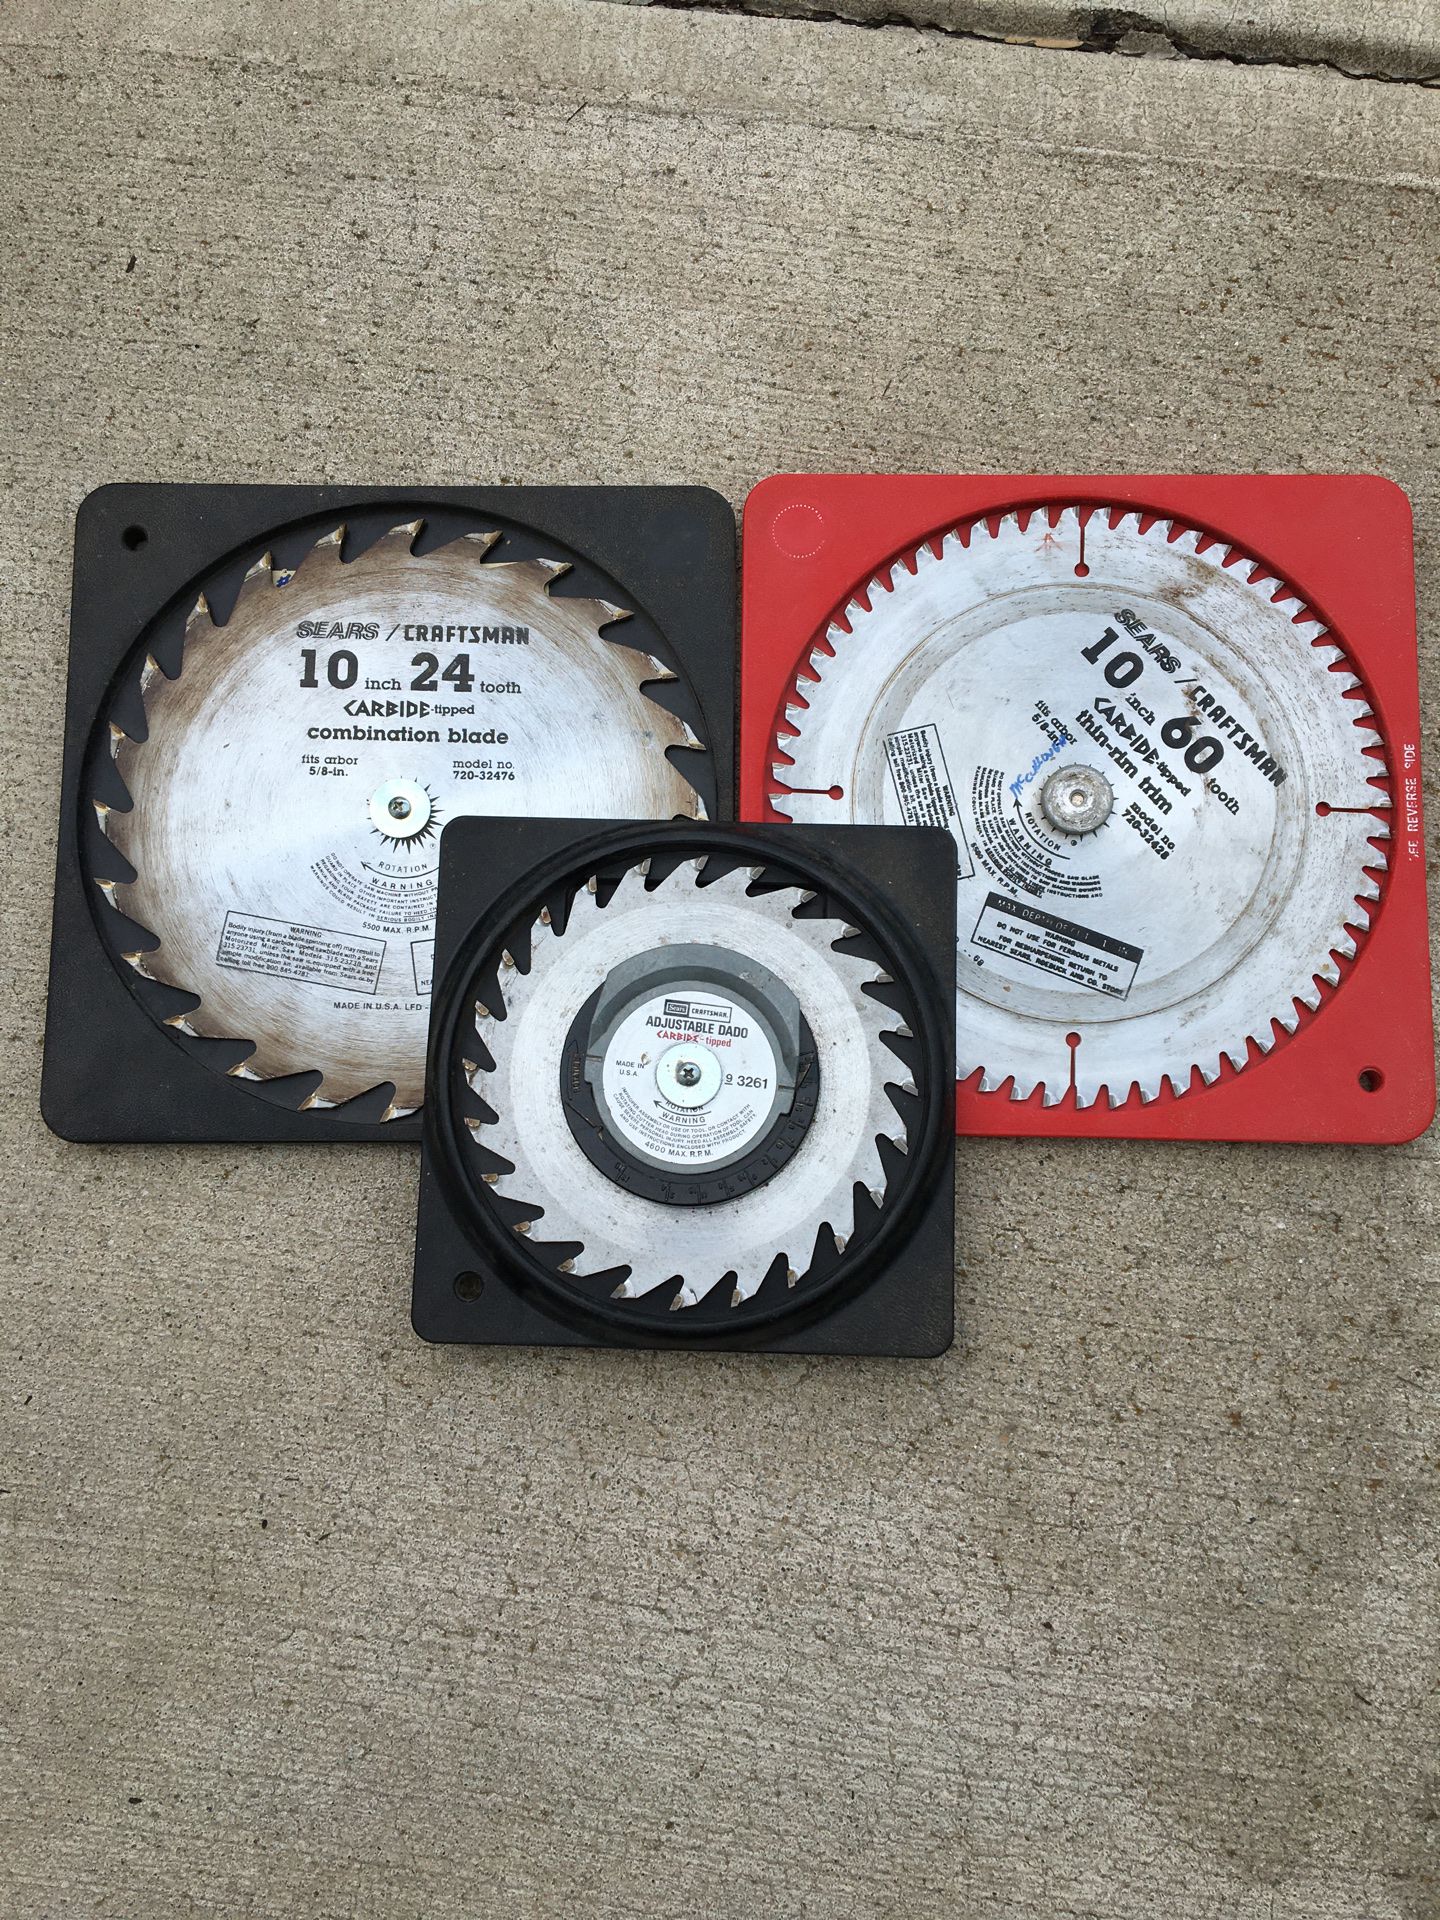 Lot of three Craftsman table/cut-off saw blades -American Made